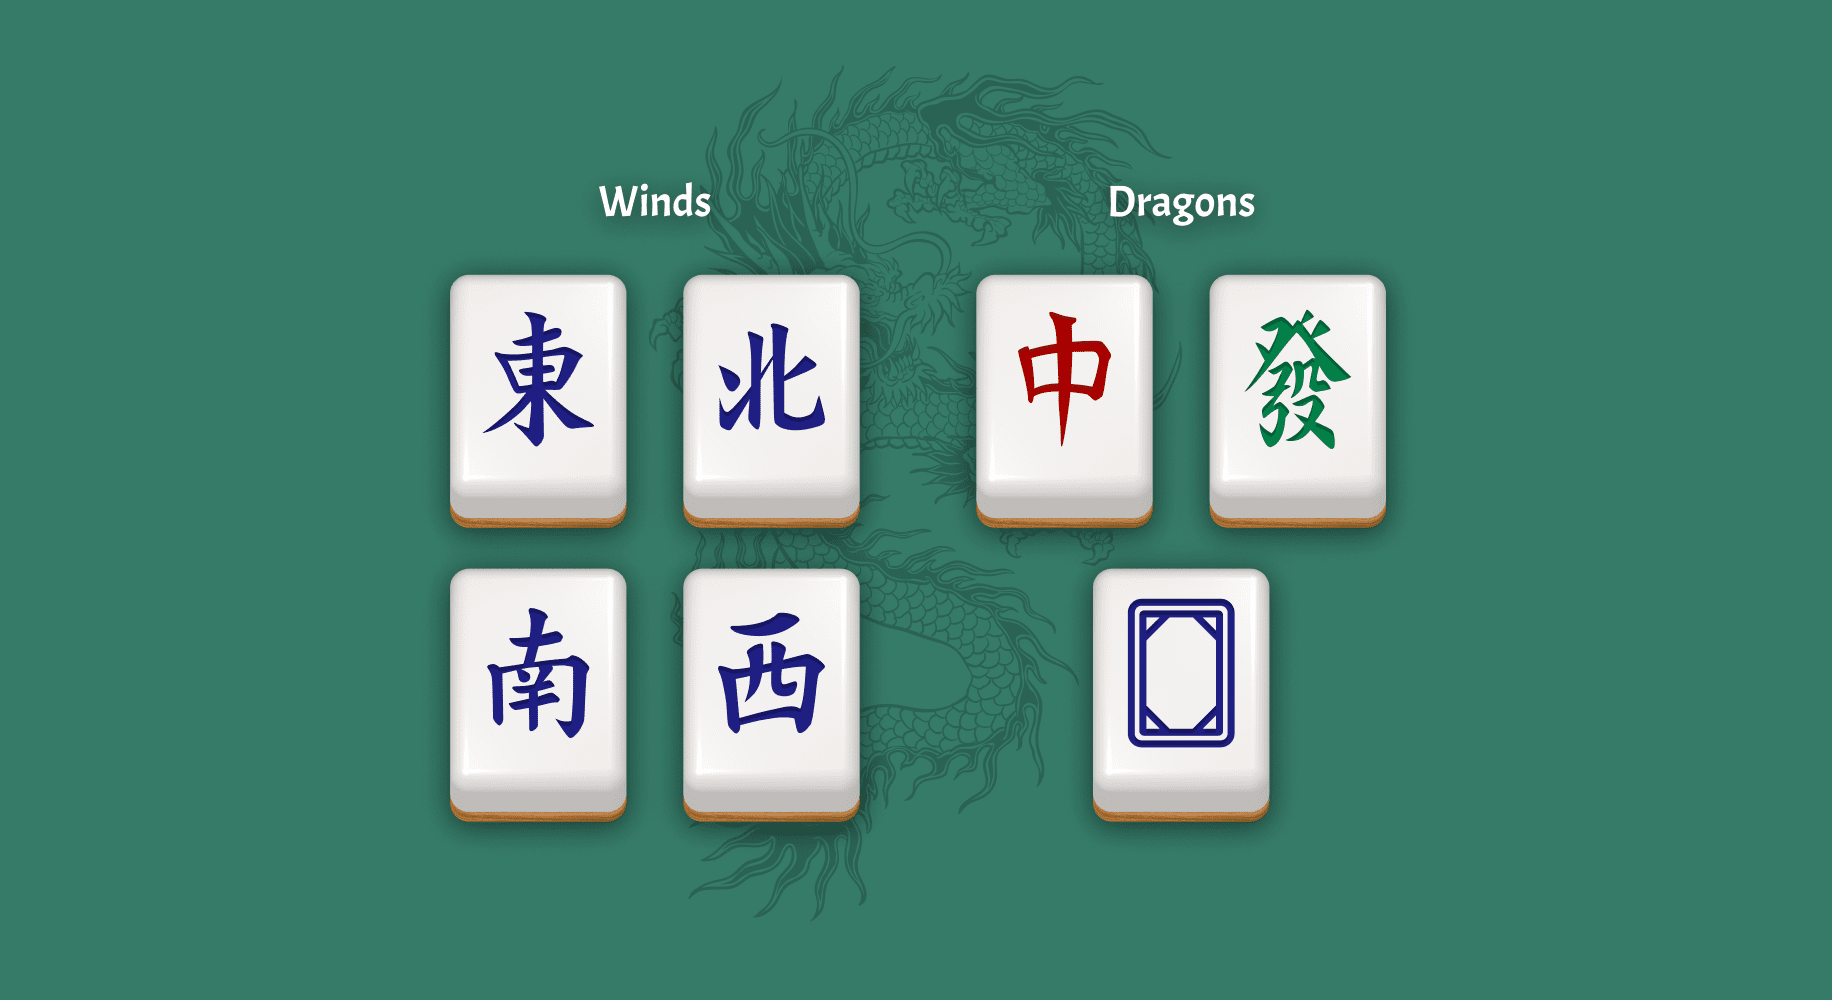 Honor tiles: Winds and Dragons